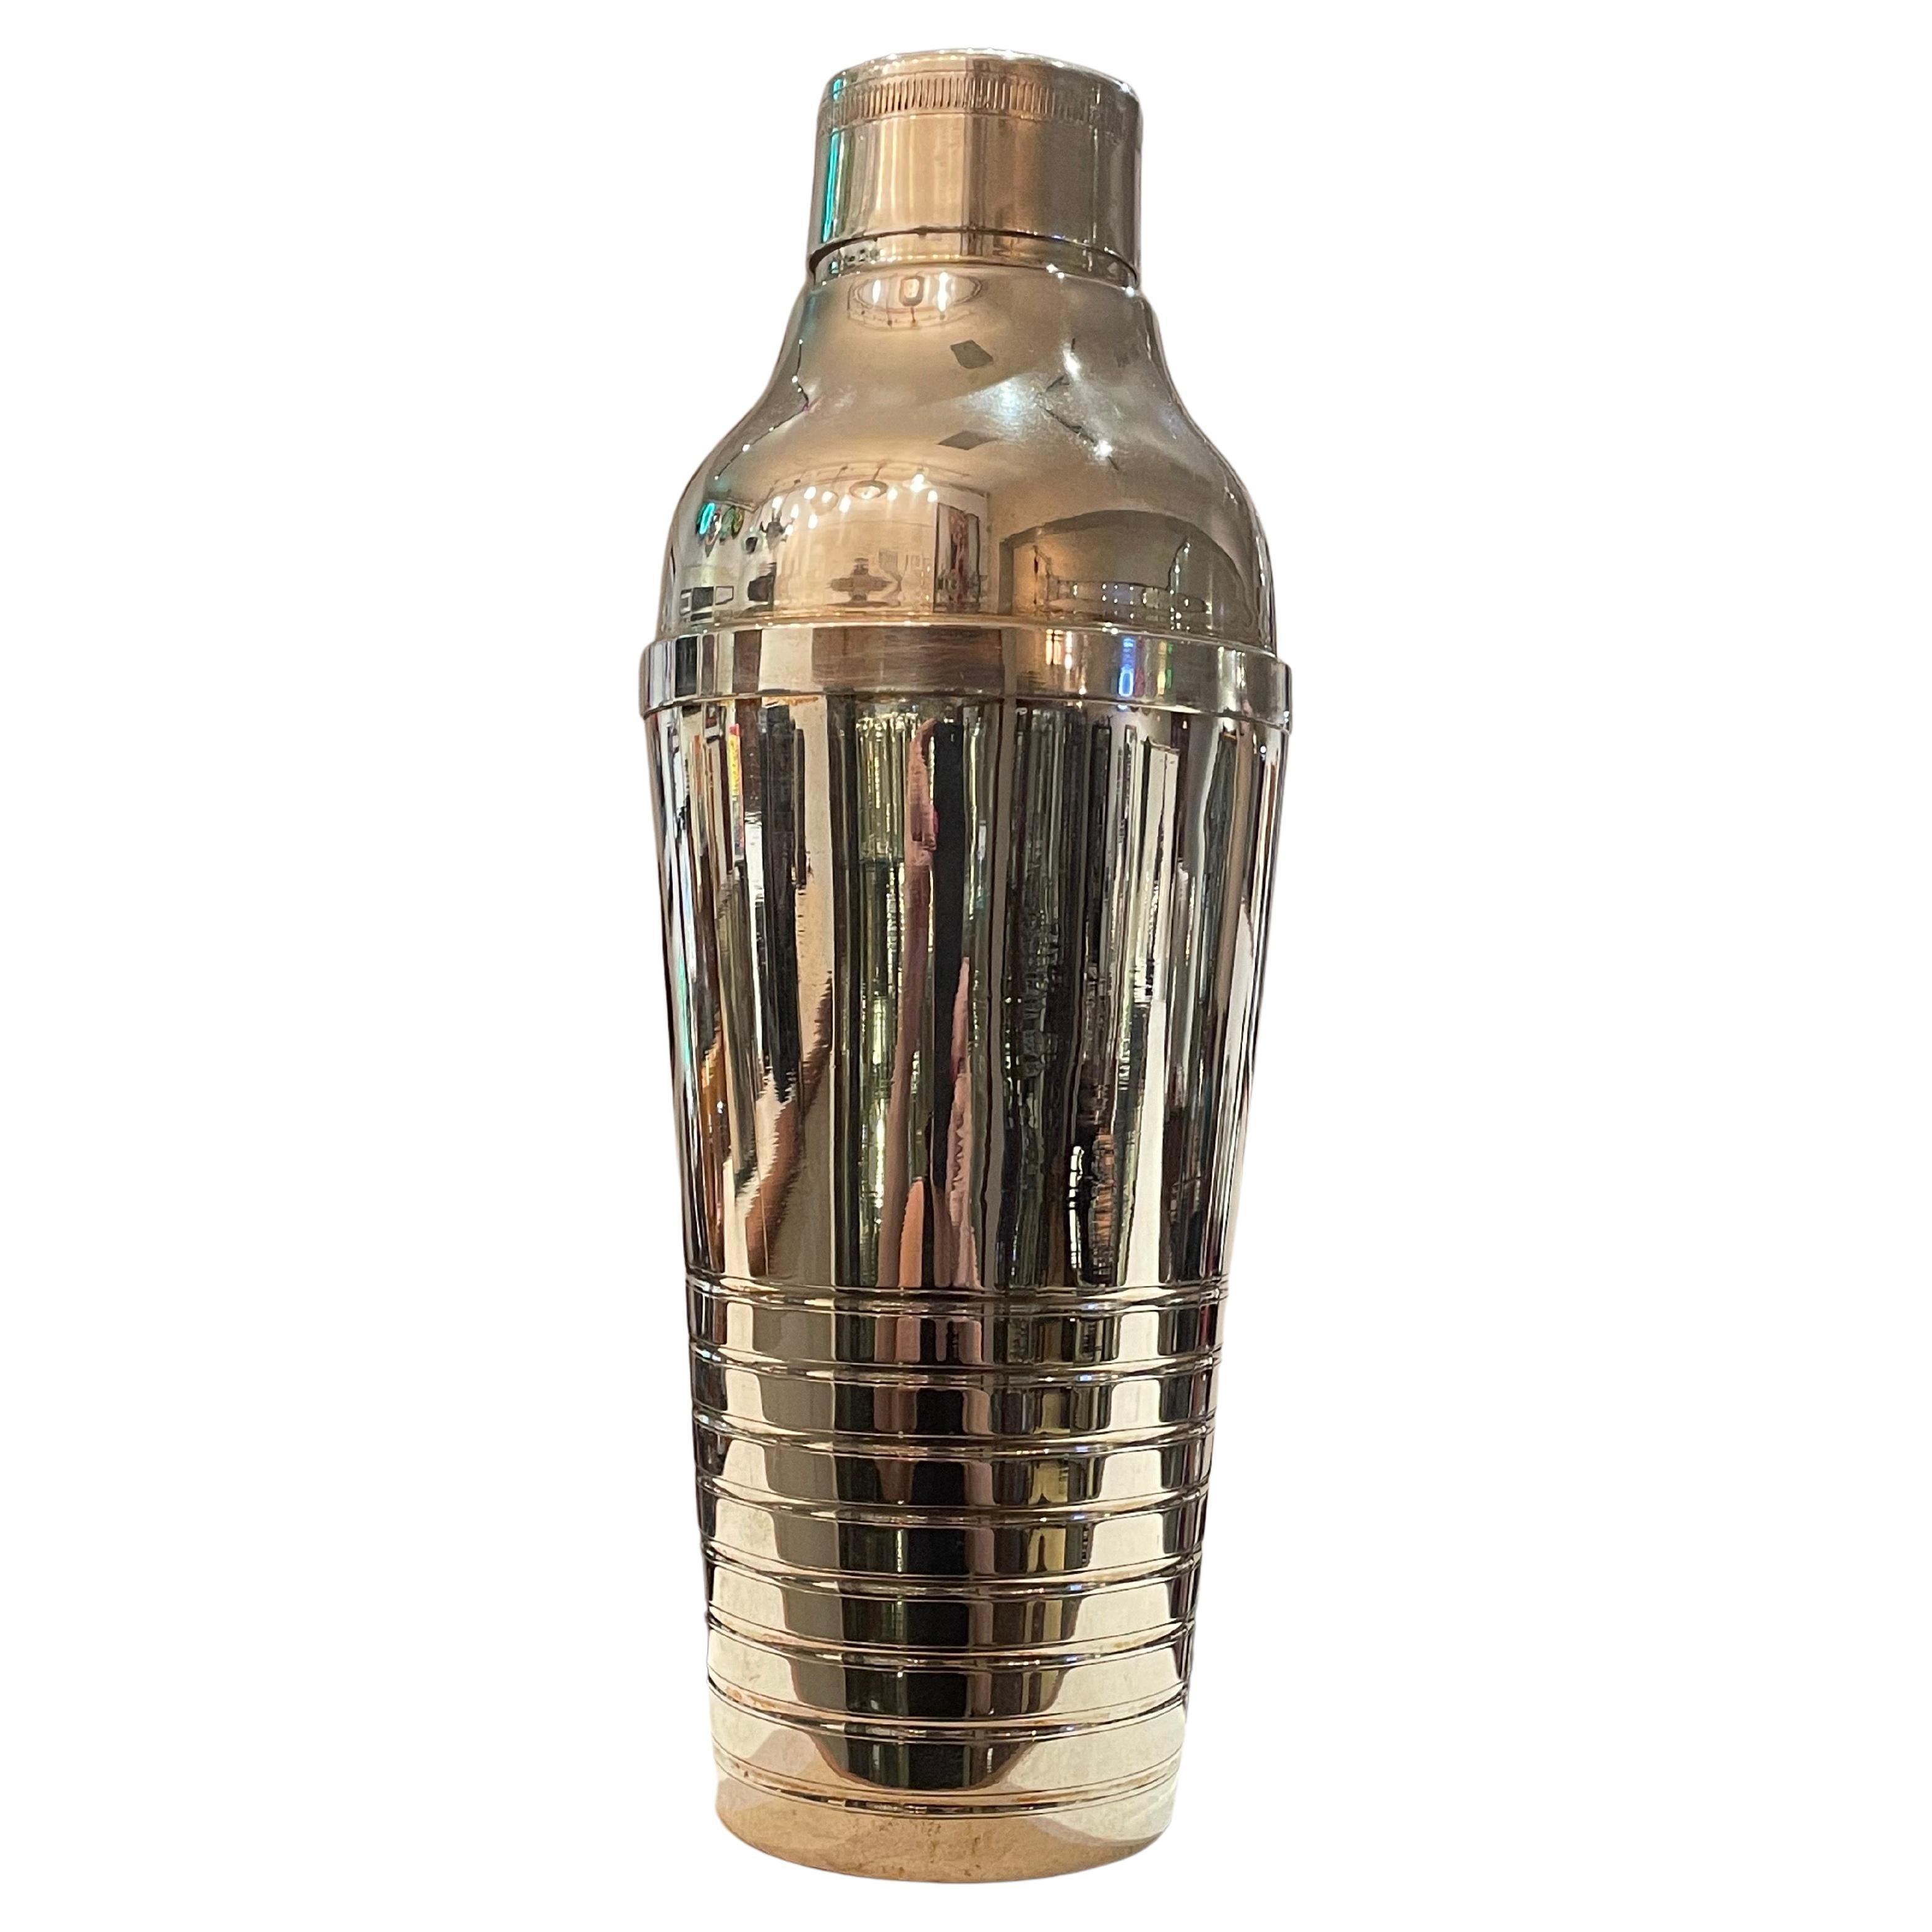 Streamlined Art Deco French Silver Plated Cocktail Shaker